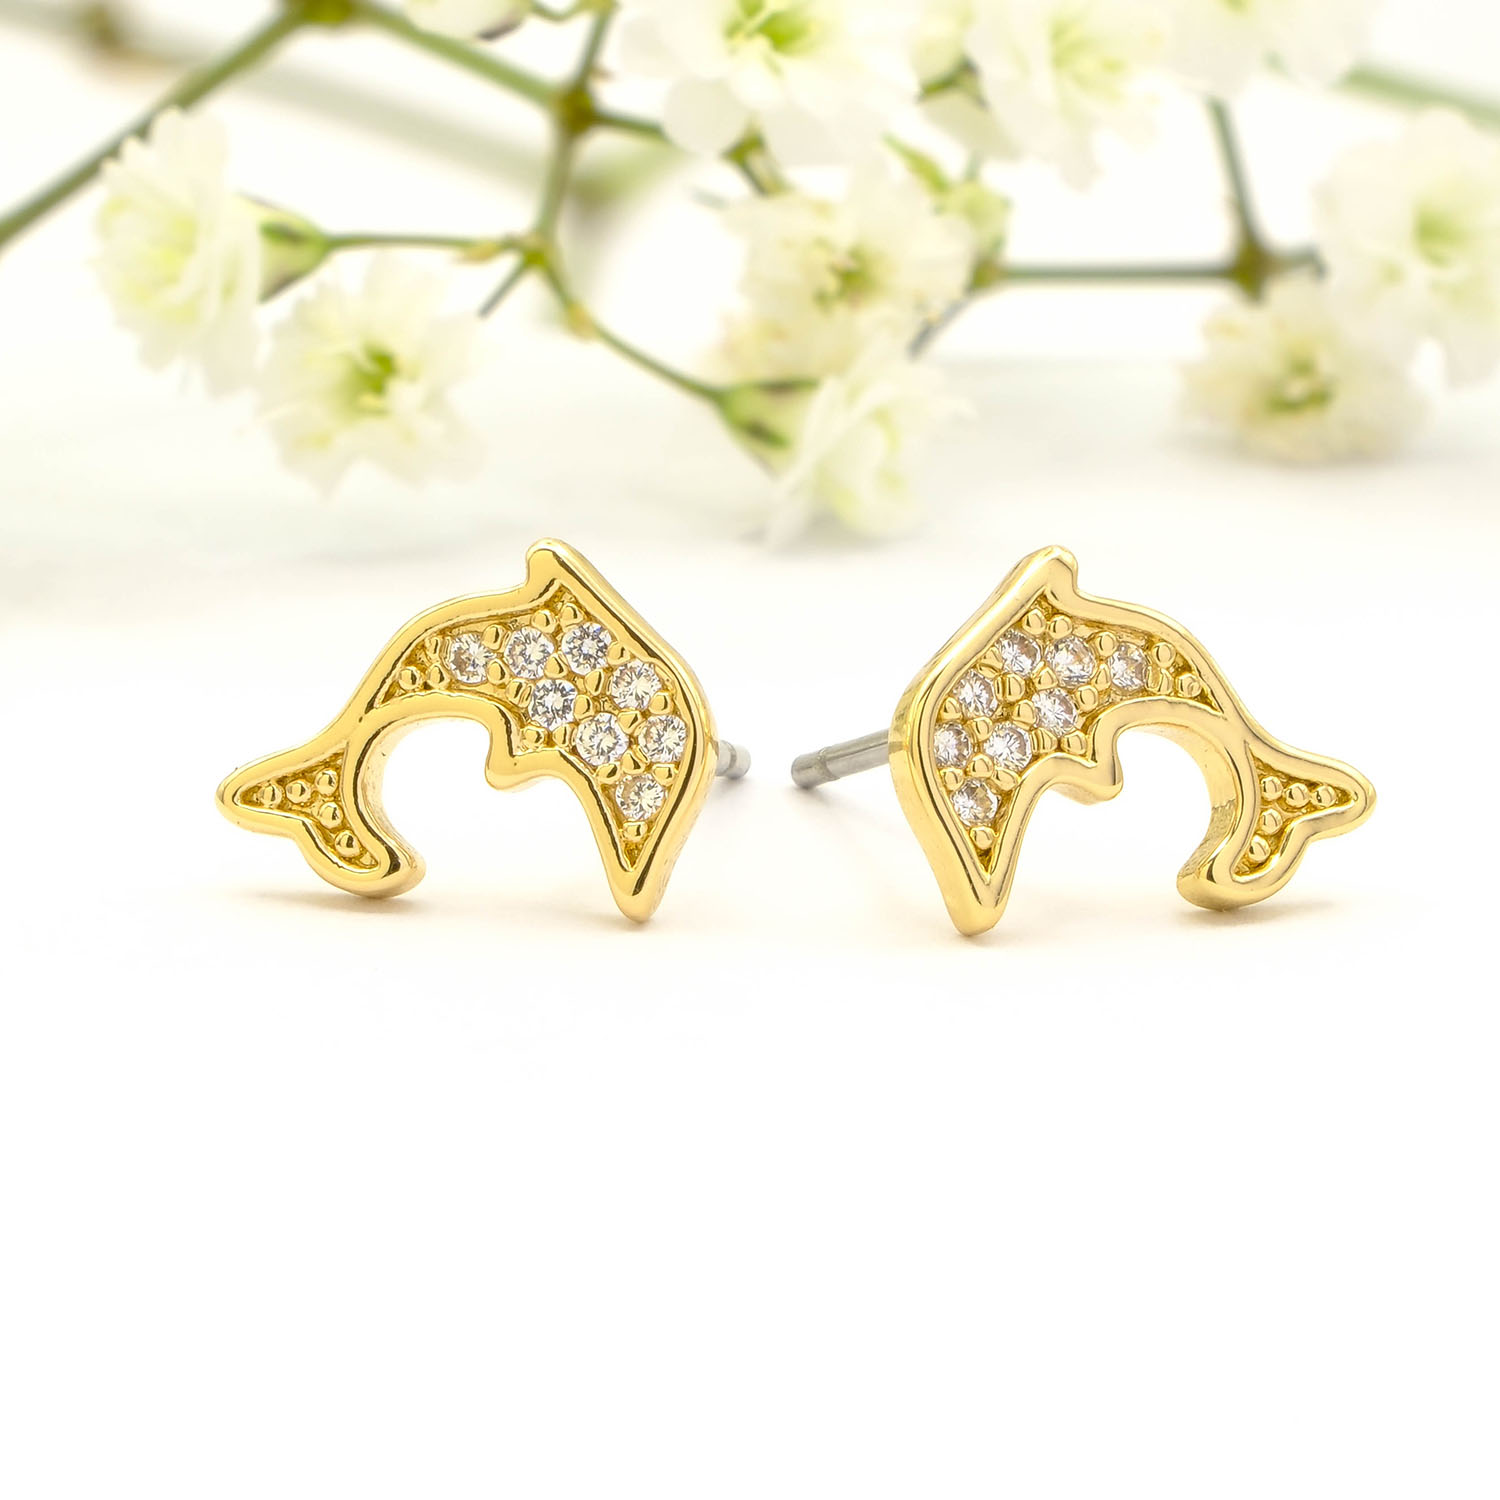 Gold Encrusted Dolphin Stud Earrings - Gold Encrusted Dolphin Stud Earrings GTK36 2